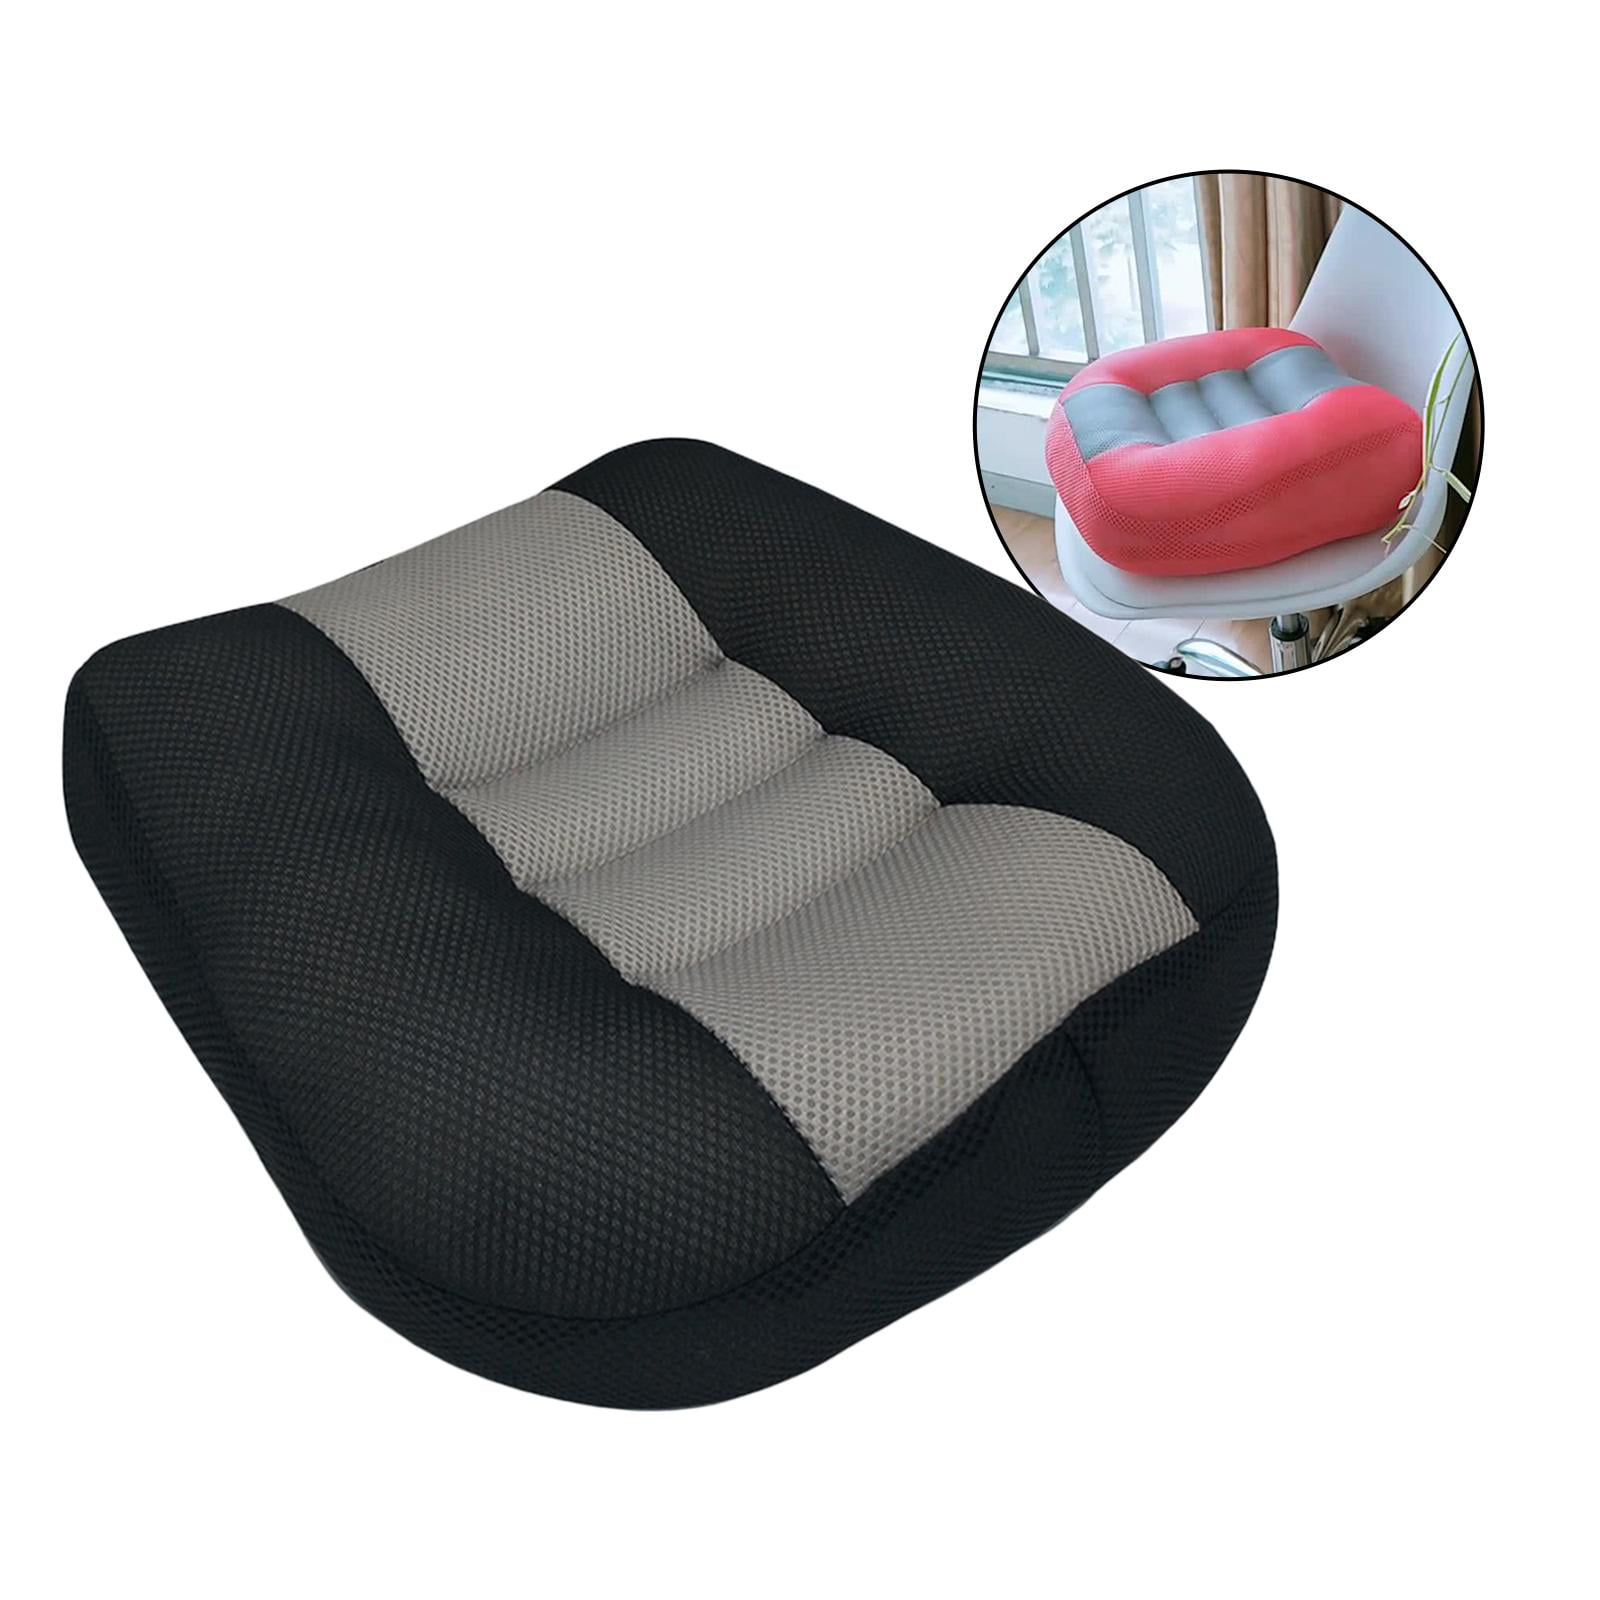 Srutirbo 6267083 WAQIA Car Booster Seat Cushion Heightening Height Boost Mat, Breathable Mesh Portable Car Seat Pad Angle Lift Seat for Car, Office,Home (Black)